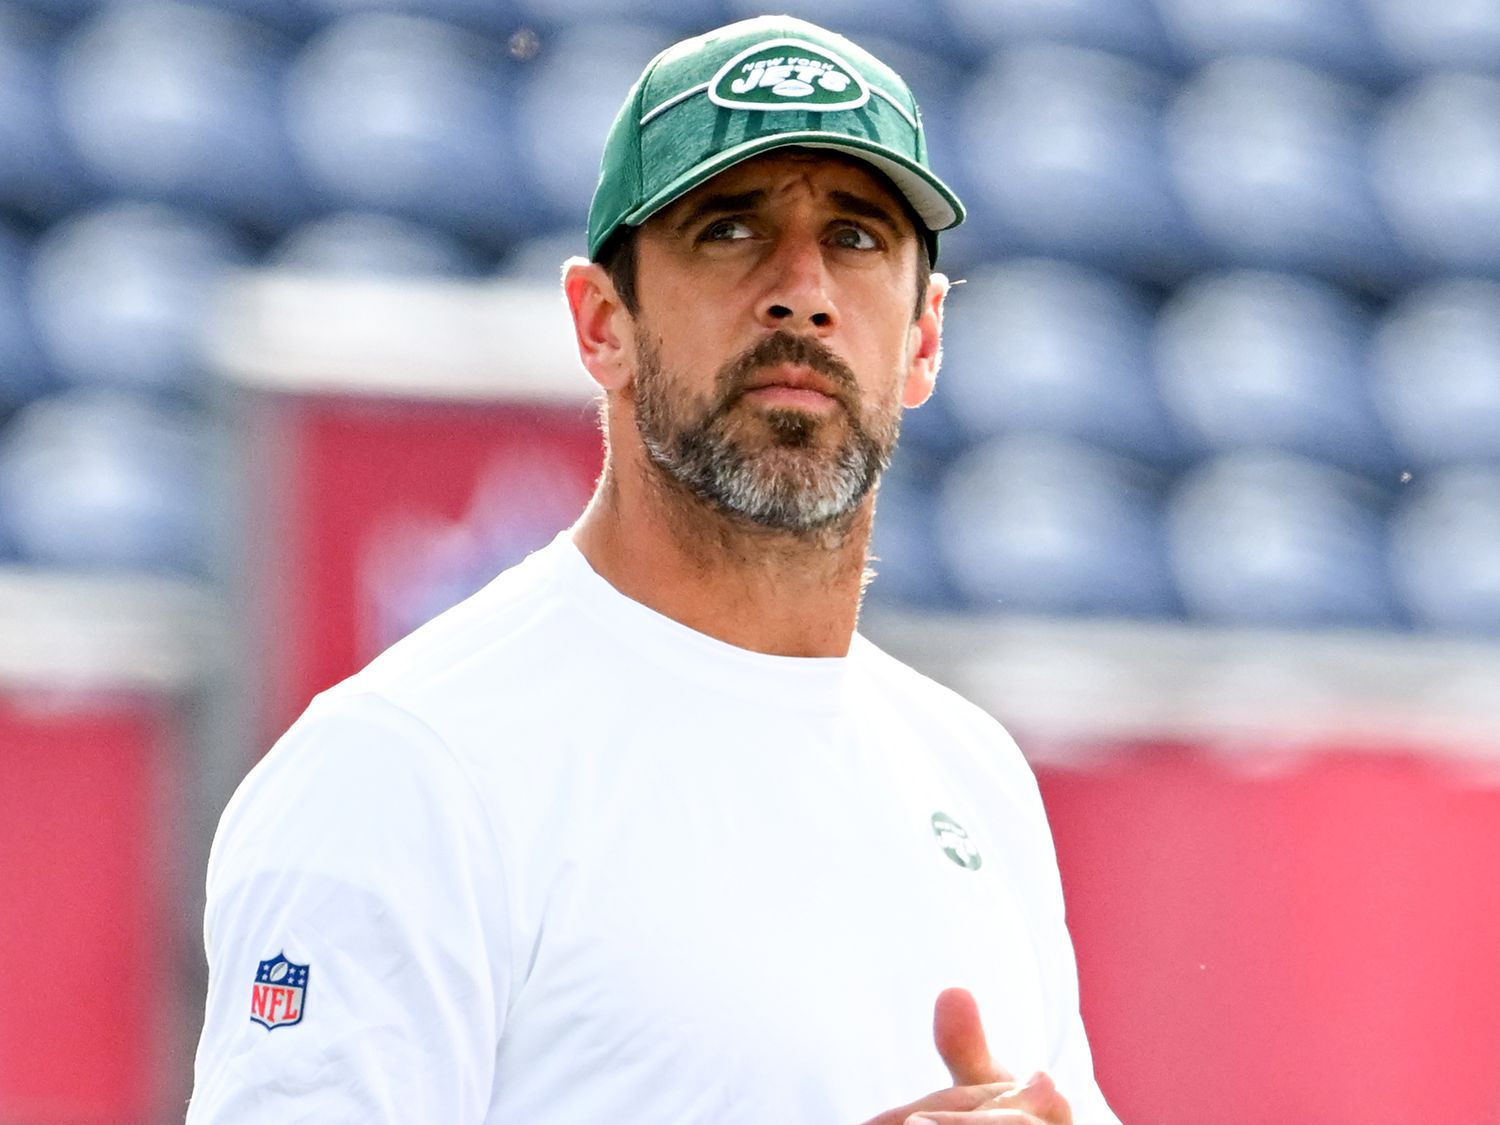 aaron-rodgers-voted-jets-most-inspirational-player-despite-limited-playing-time